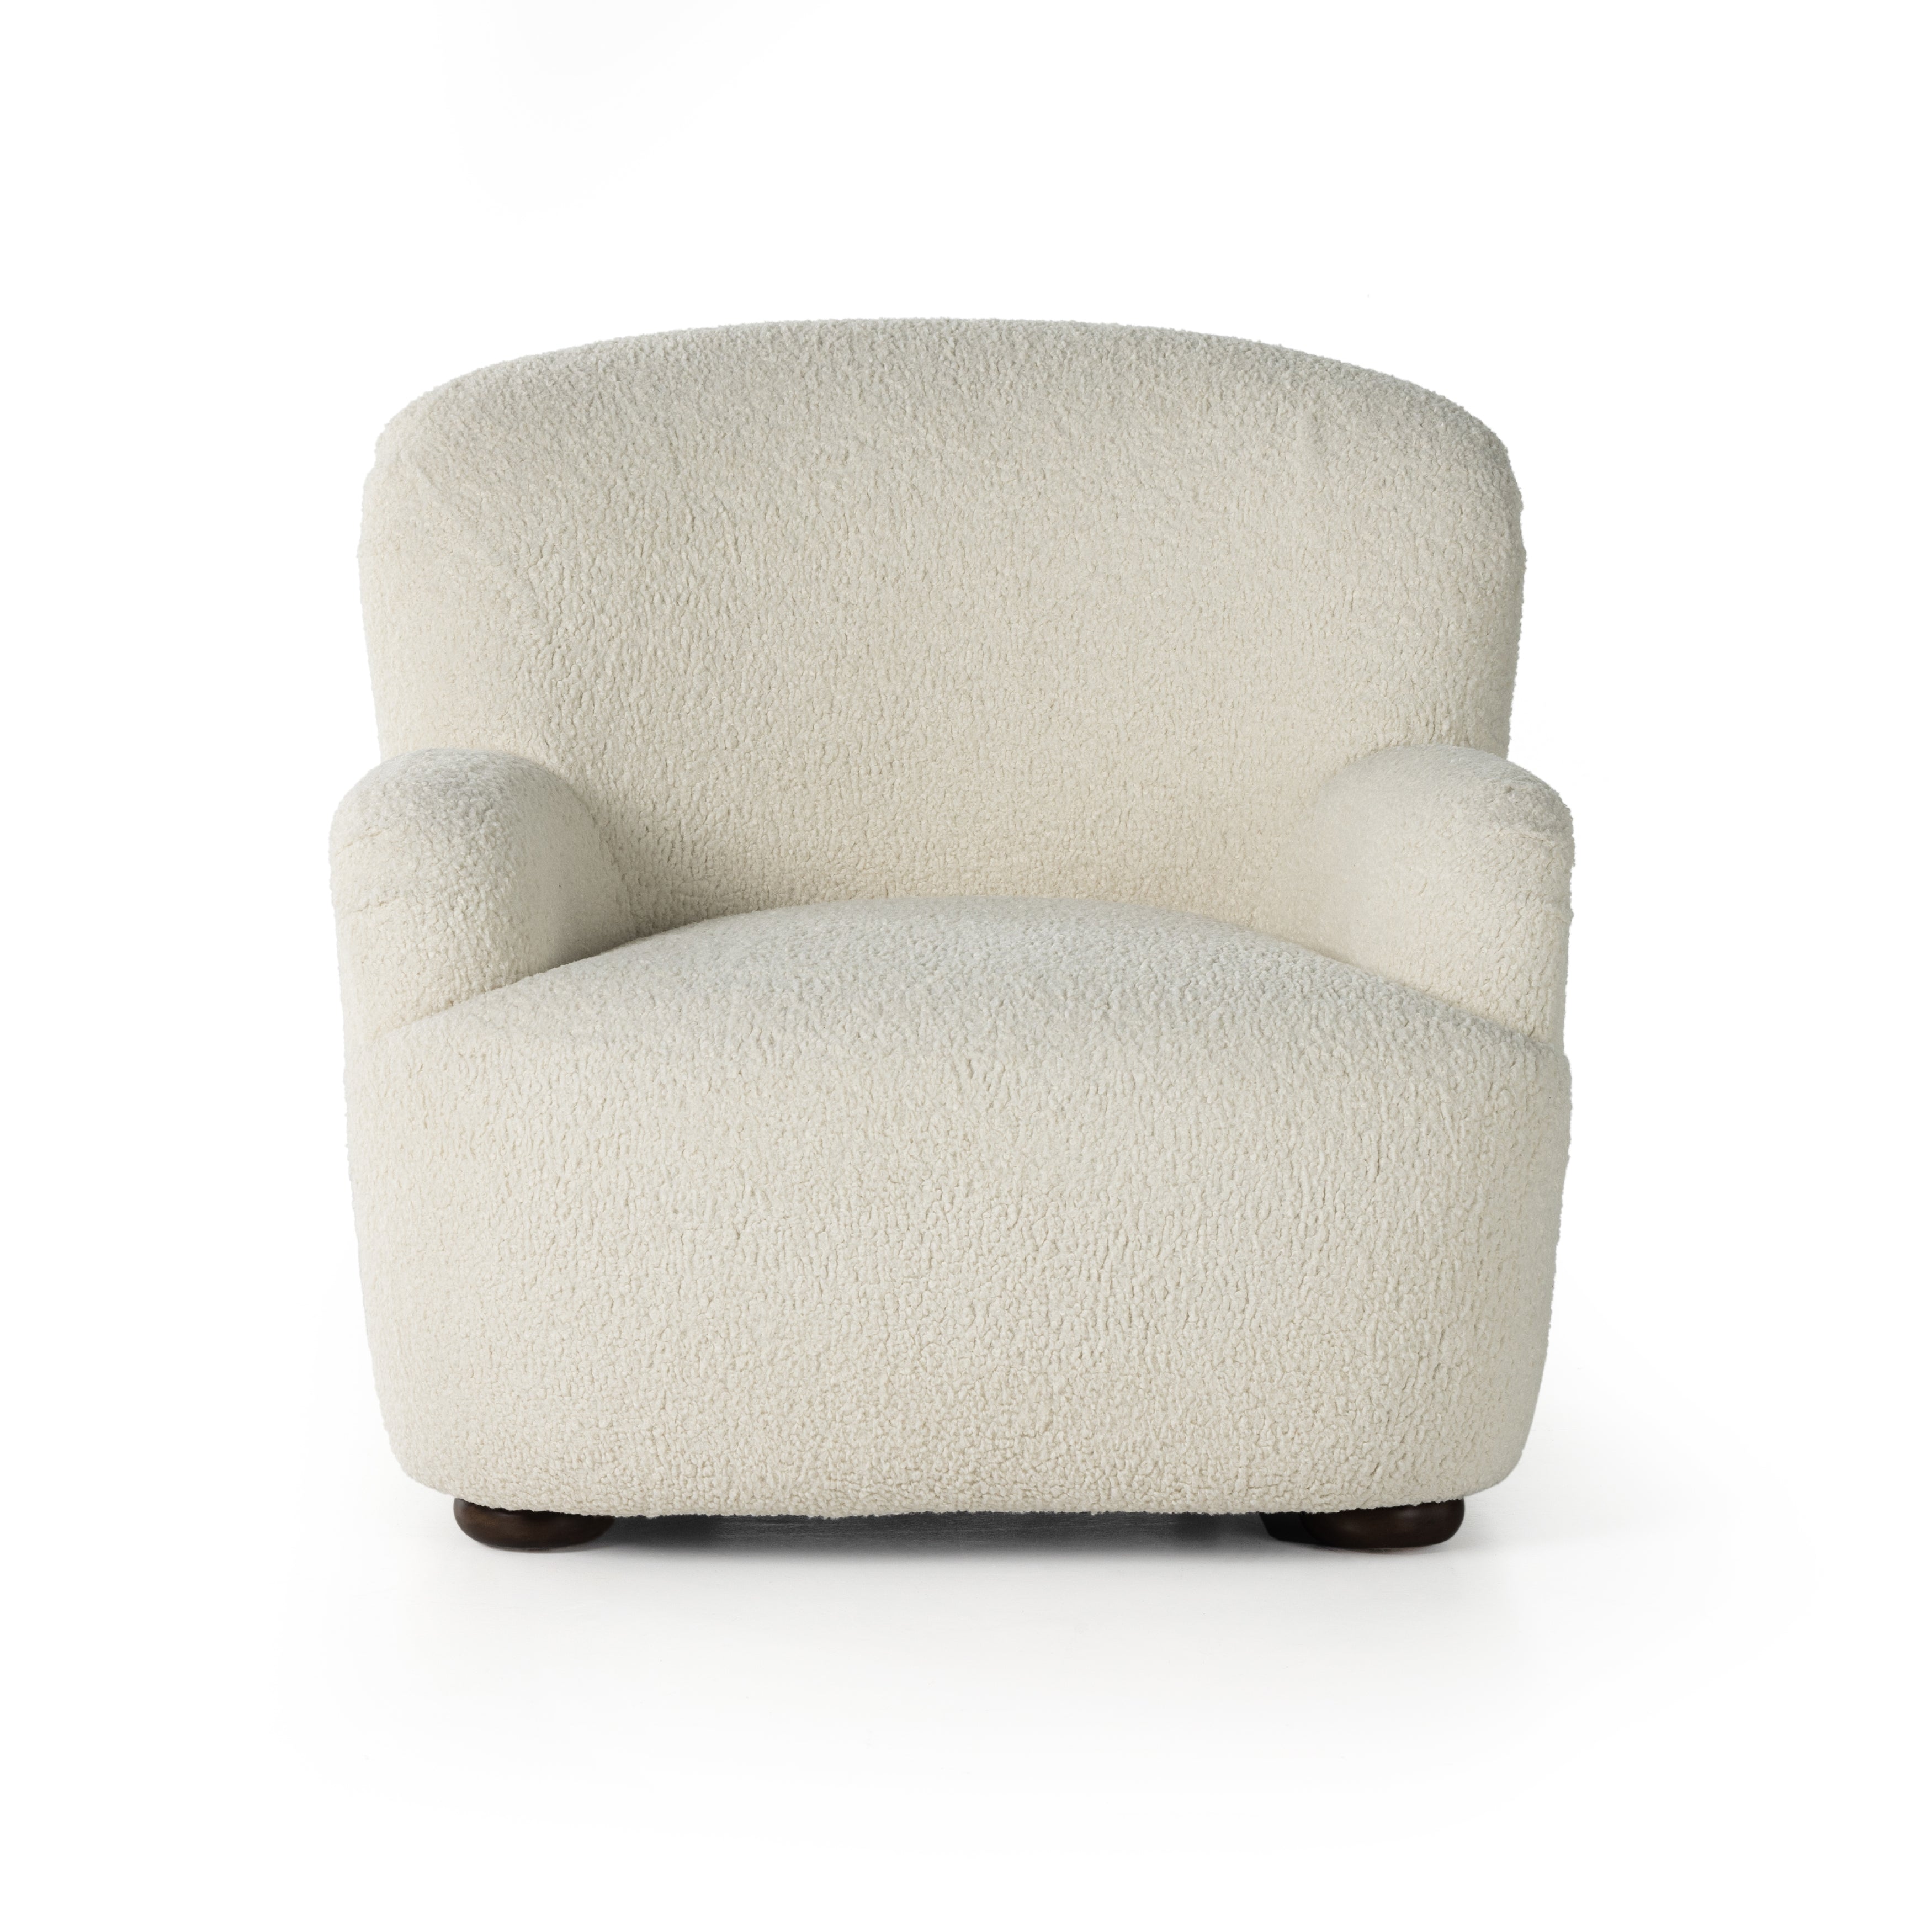 Kadon Sheepskin Natural Chair's high wing back pairs with softly rolled arms for a curvy look and supportive sit. Cream shearling-like upholstery invites you to sit and stay a while Amethyst Home provides interior design services, furniture, rugs, and lighting in the Calabasas metro area. 